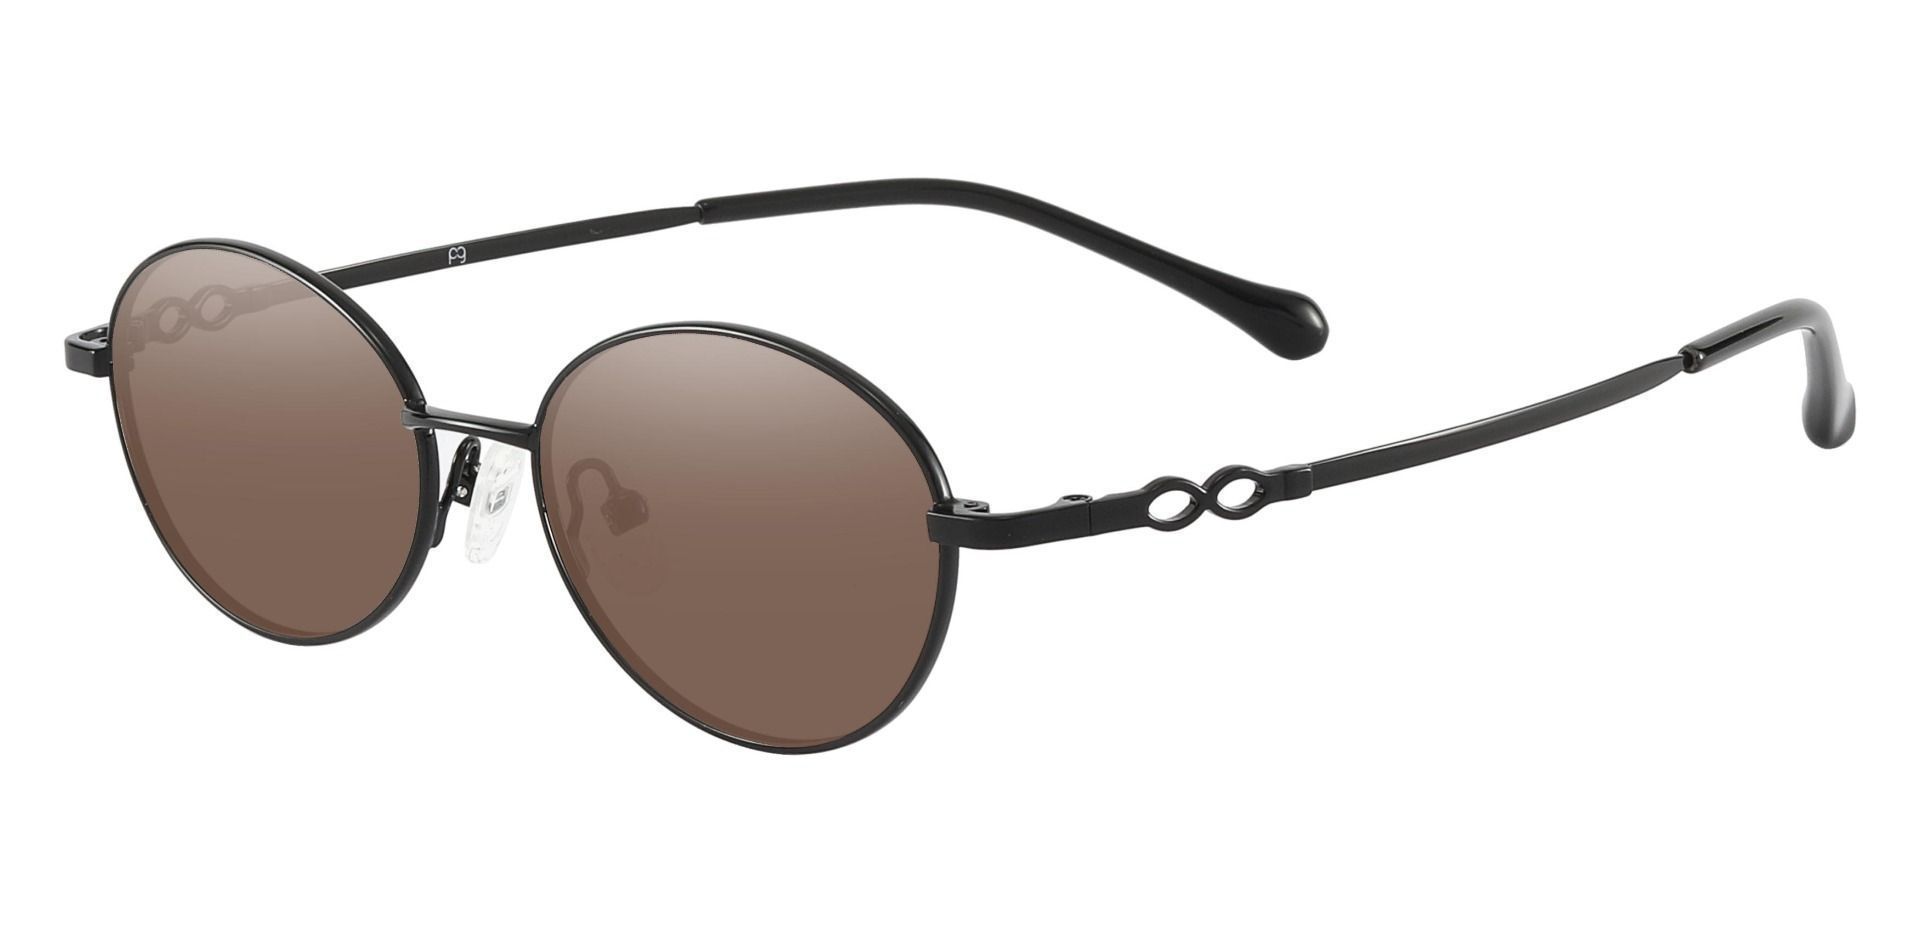 Odyssey Oval Non-Rx Sunglasses - Black Frame With Brown Lenses